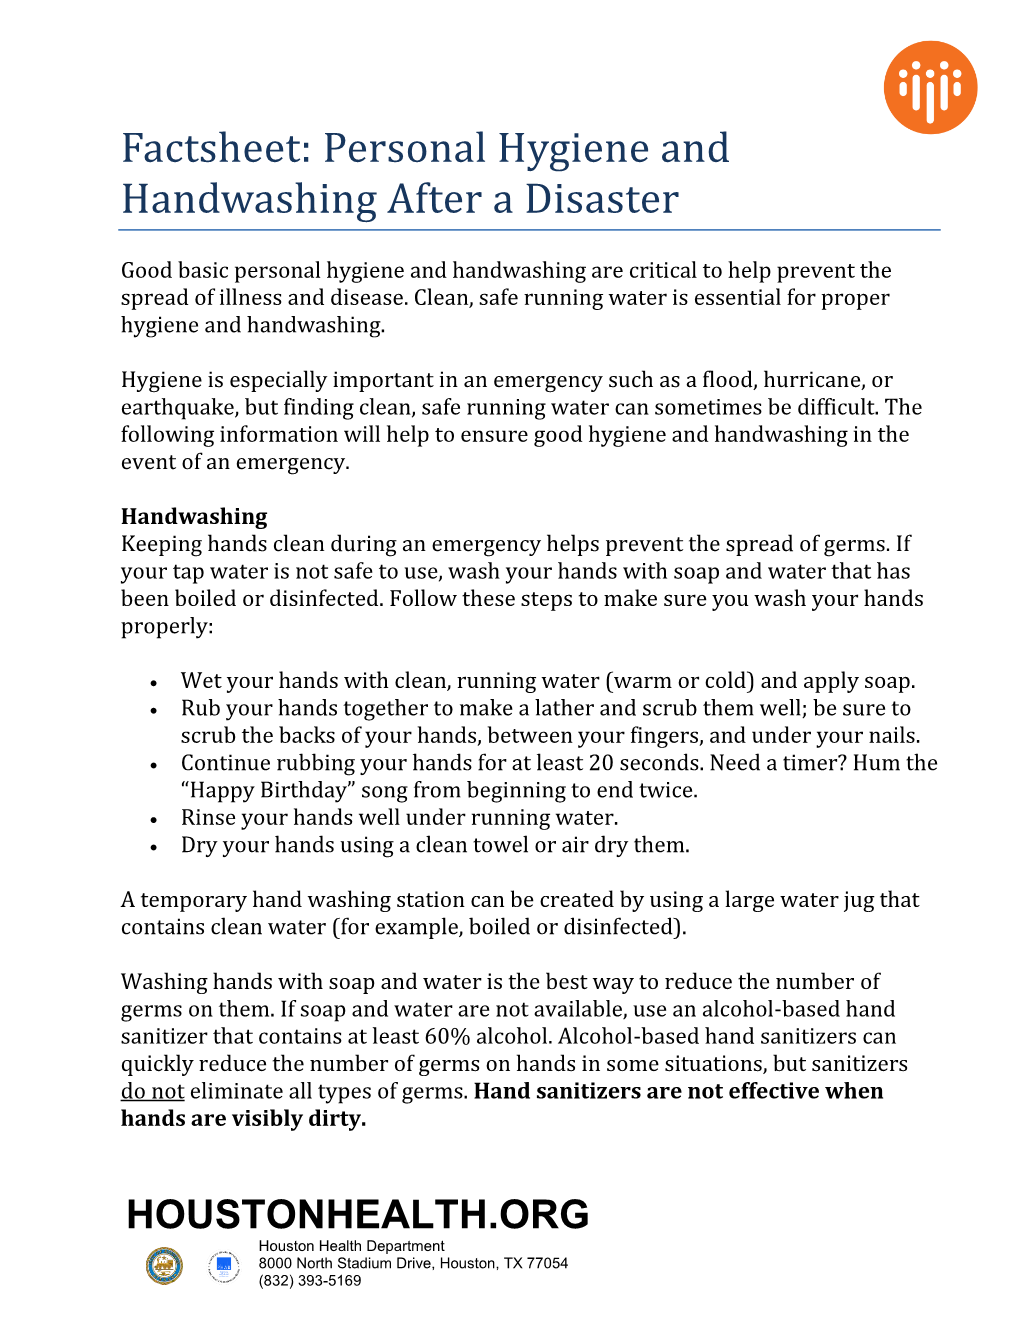 Factsheet: Personal Hygiene and Handwashing After a Disaster